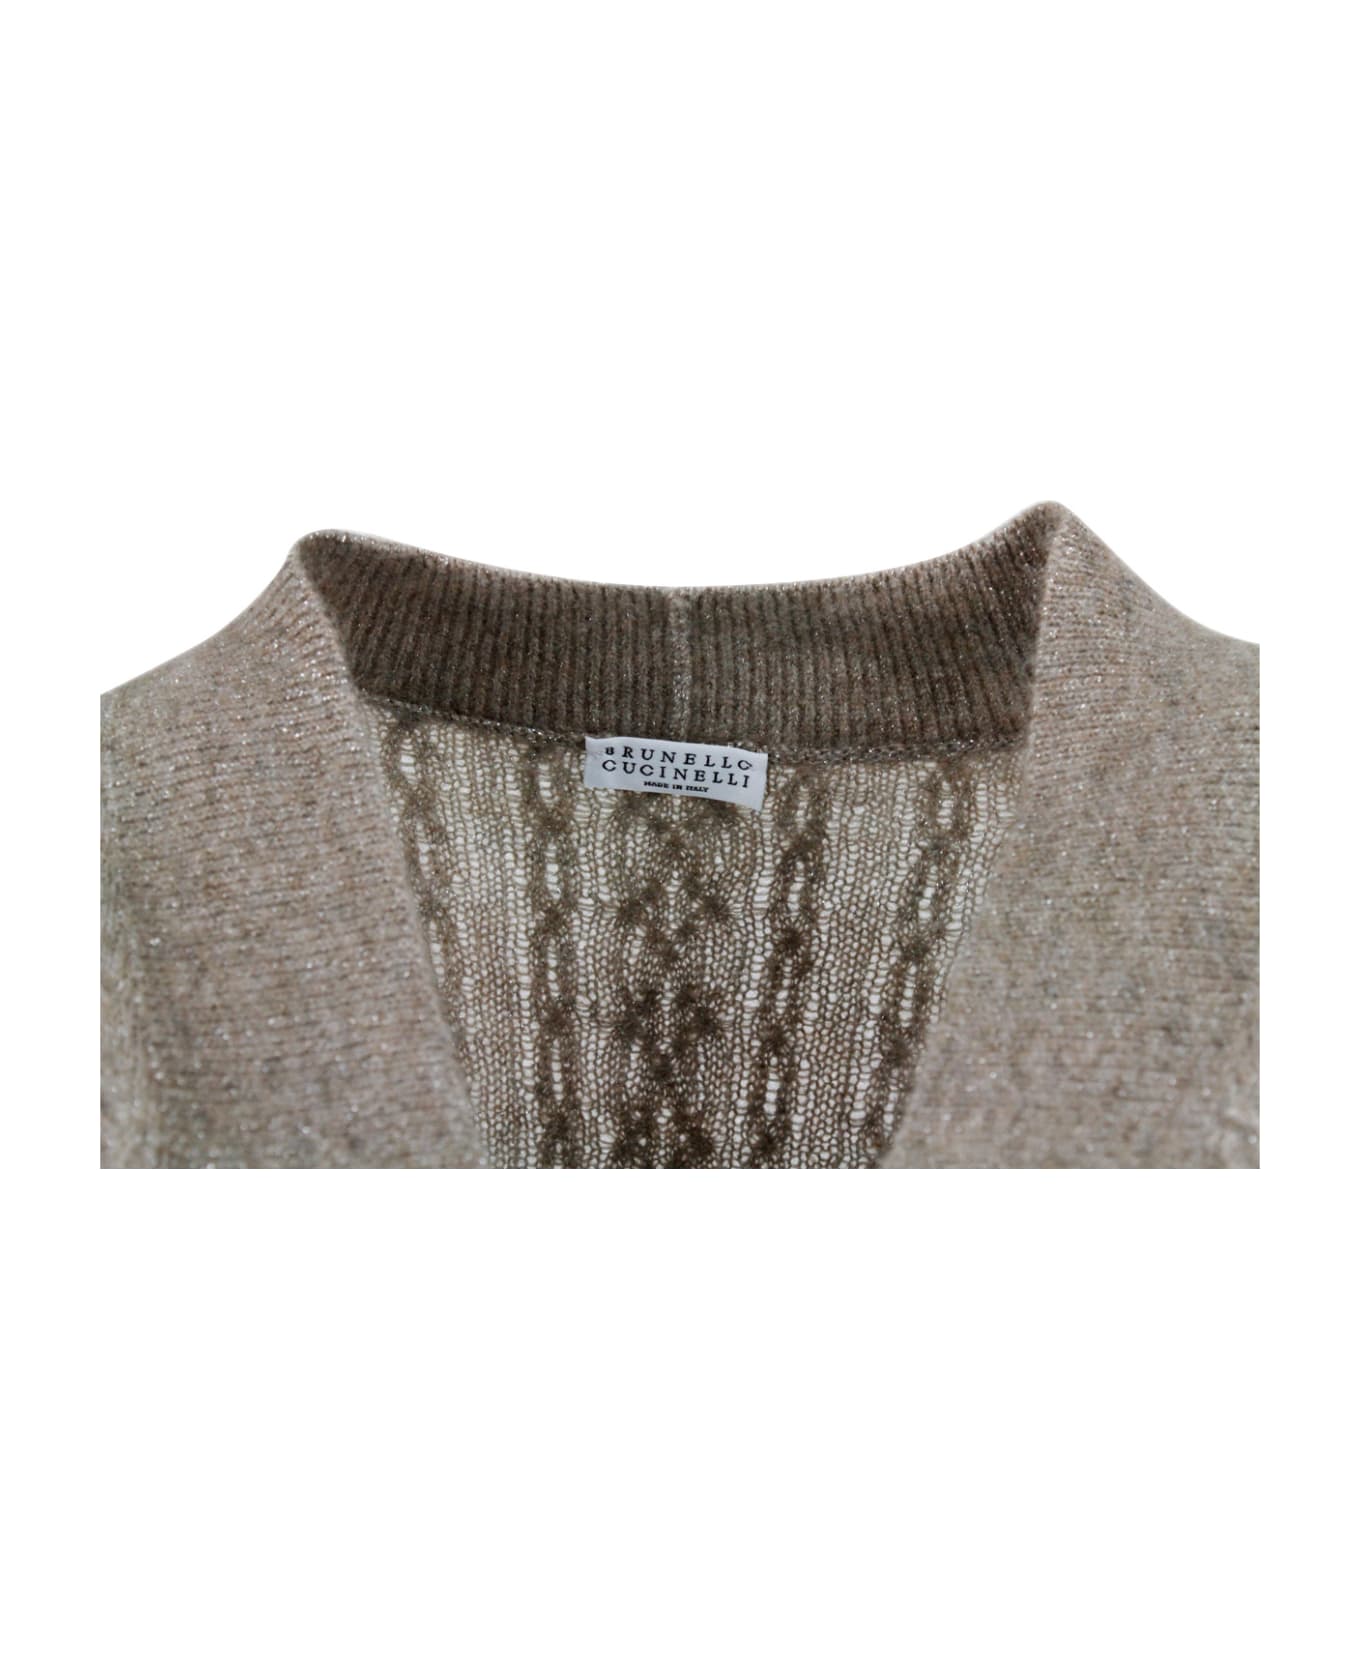 Brunello Cucinelli Cable Knit Wool Blend Cardigan Sweater - Brown